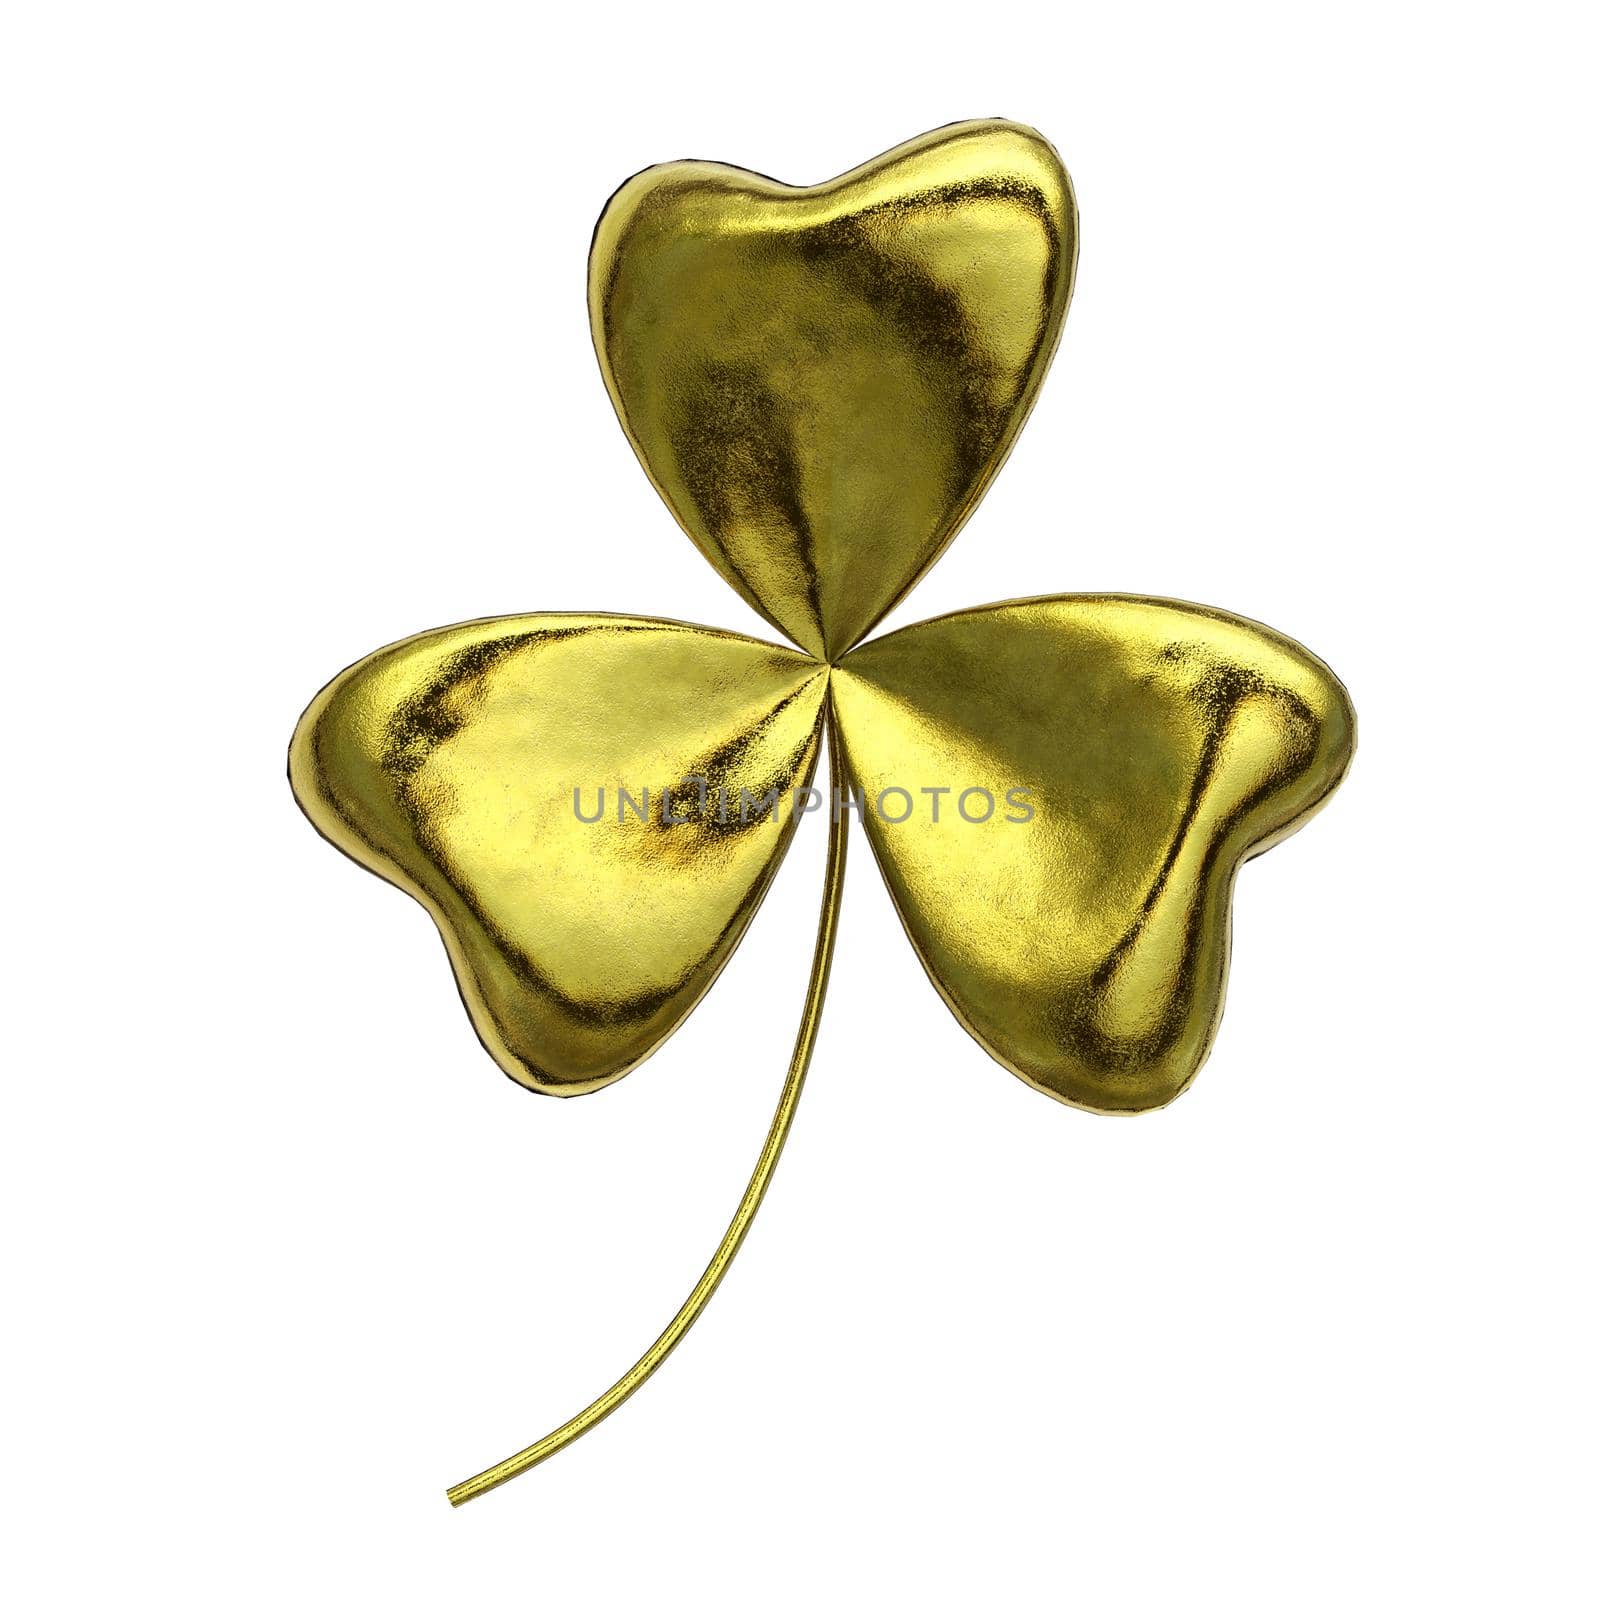 Gold shamrock on isolated white background. Object and Nature concept. Saint Patrick day theme. 3D illustration rendering. Clipping path use